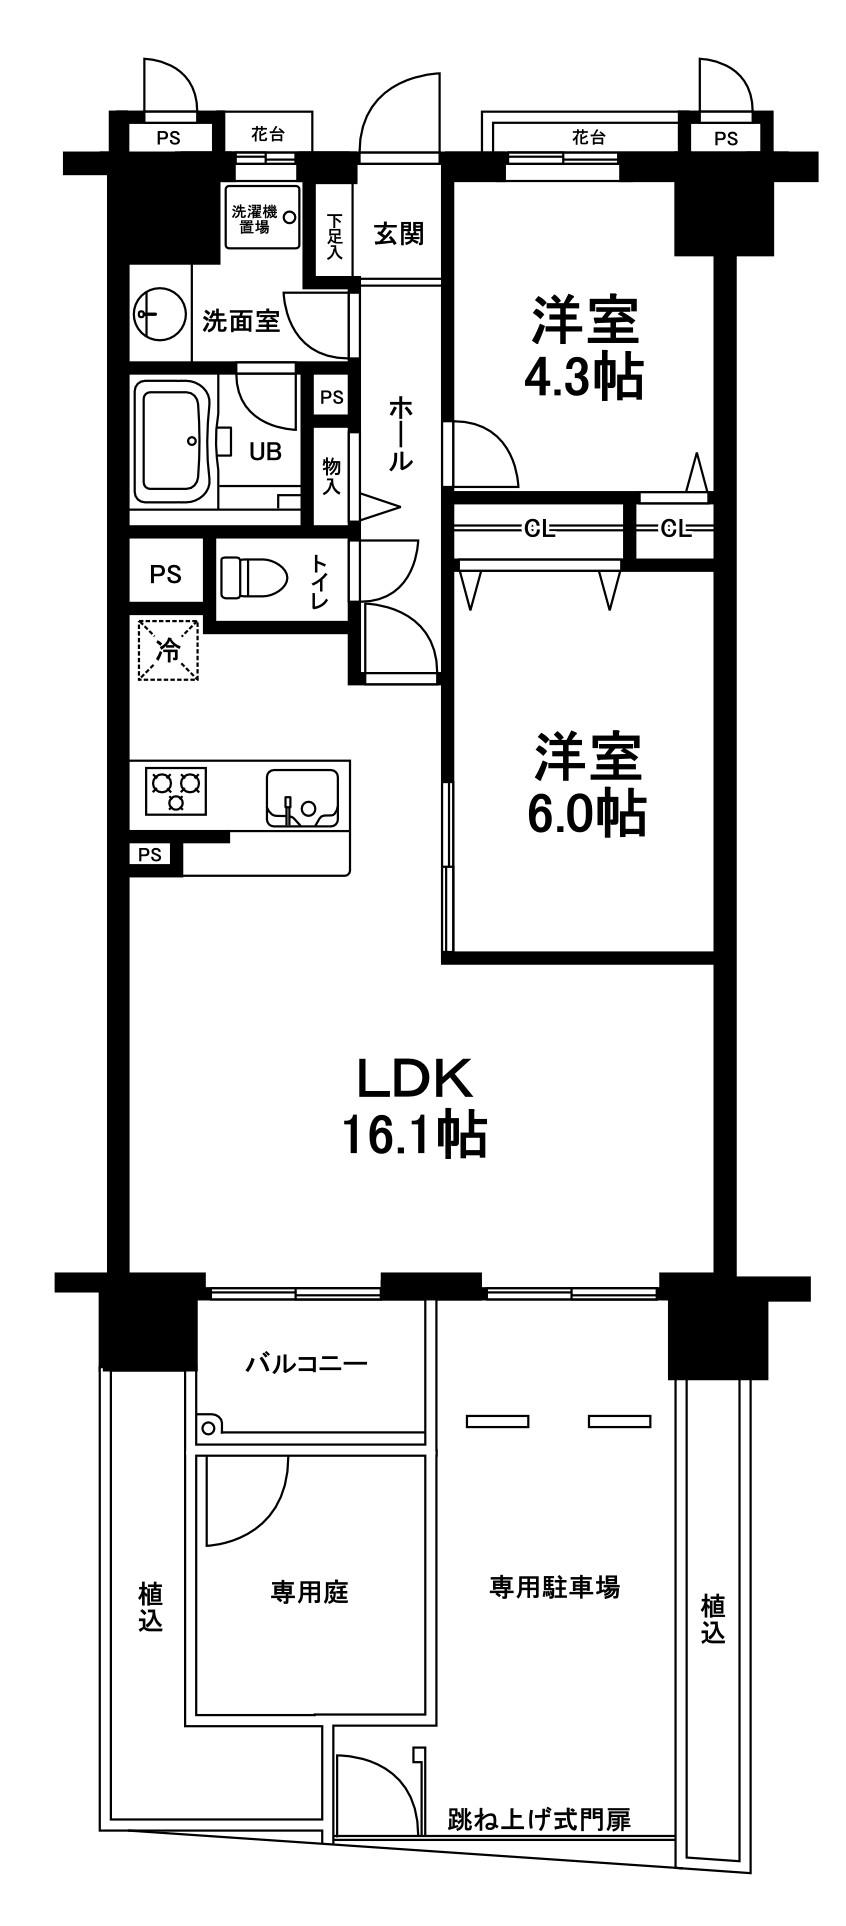 Floor plan. 2LDK, Price 33,800,000 yen, Occupied area 59.16 sq m , A private garden balcony area 3.41 sq m detached sense ・ With private parking